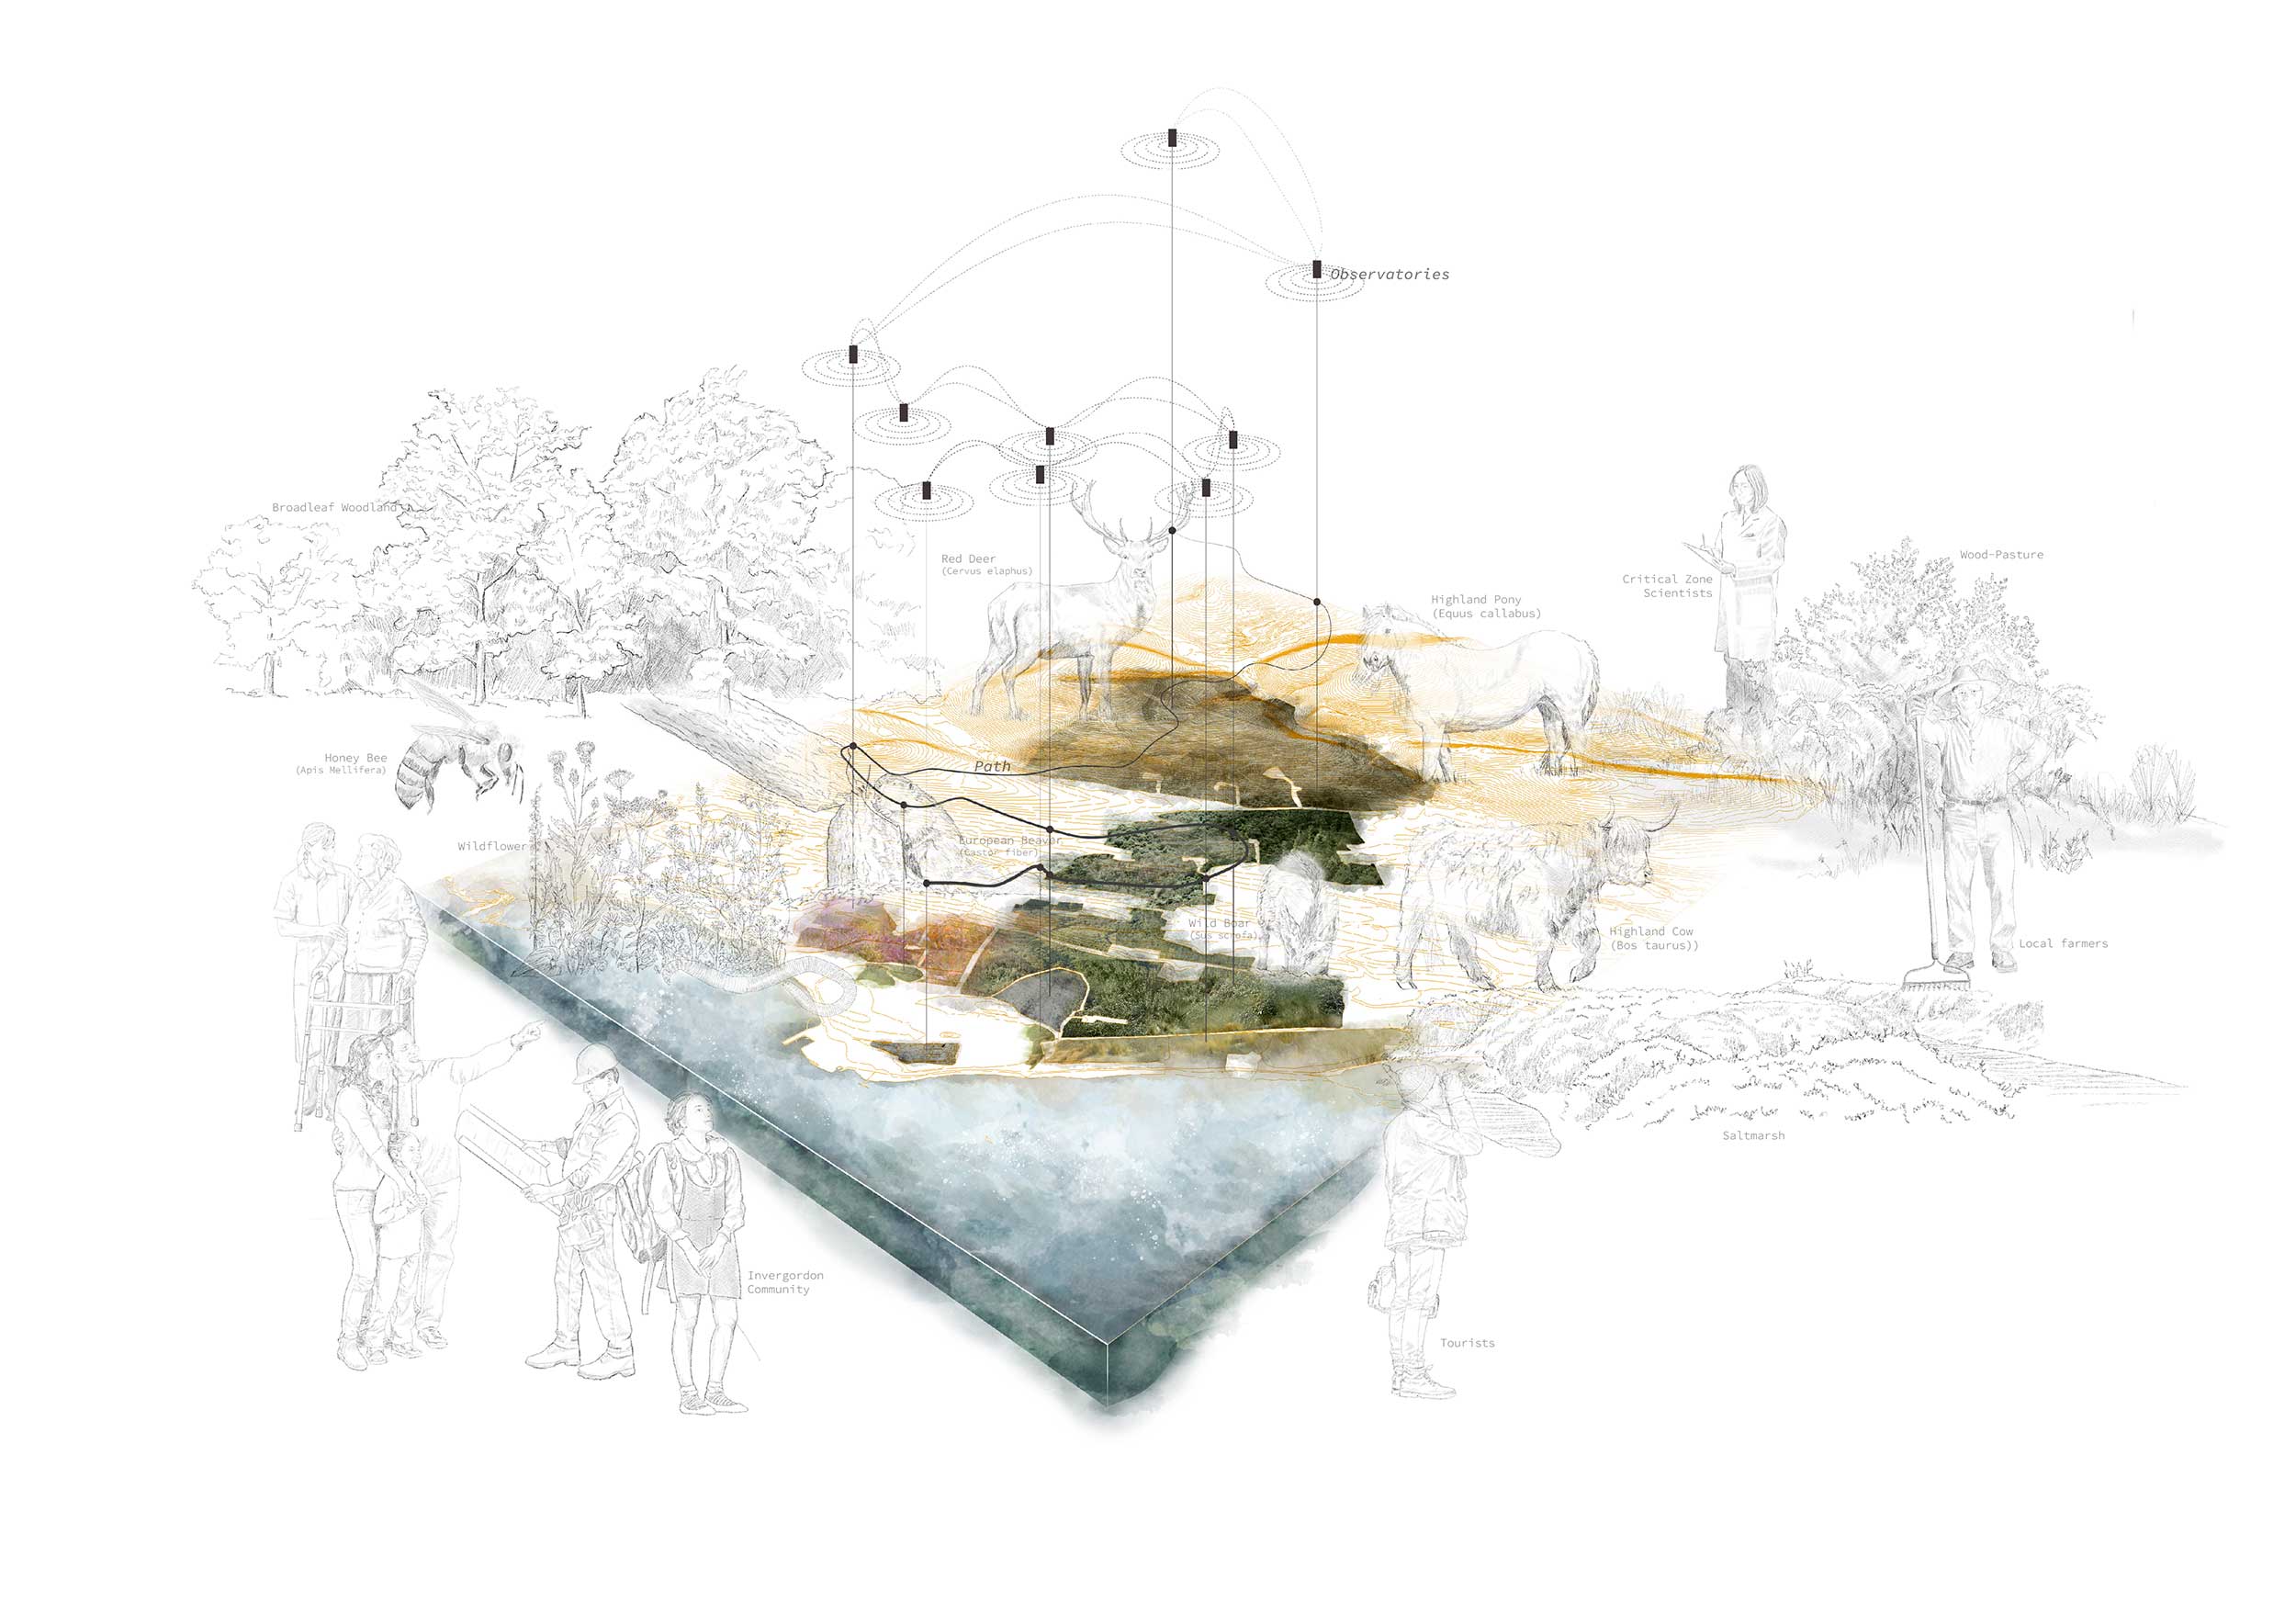 Project Synthesis Drawing of the Intelligent Wilderness 